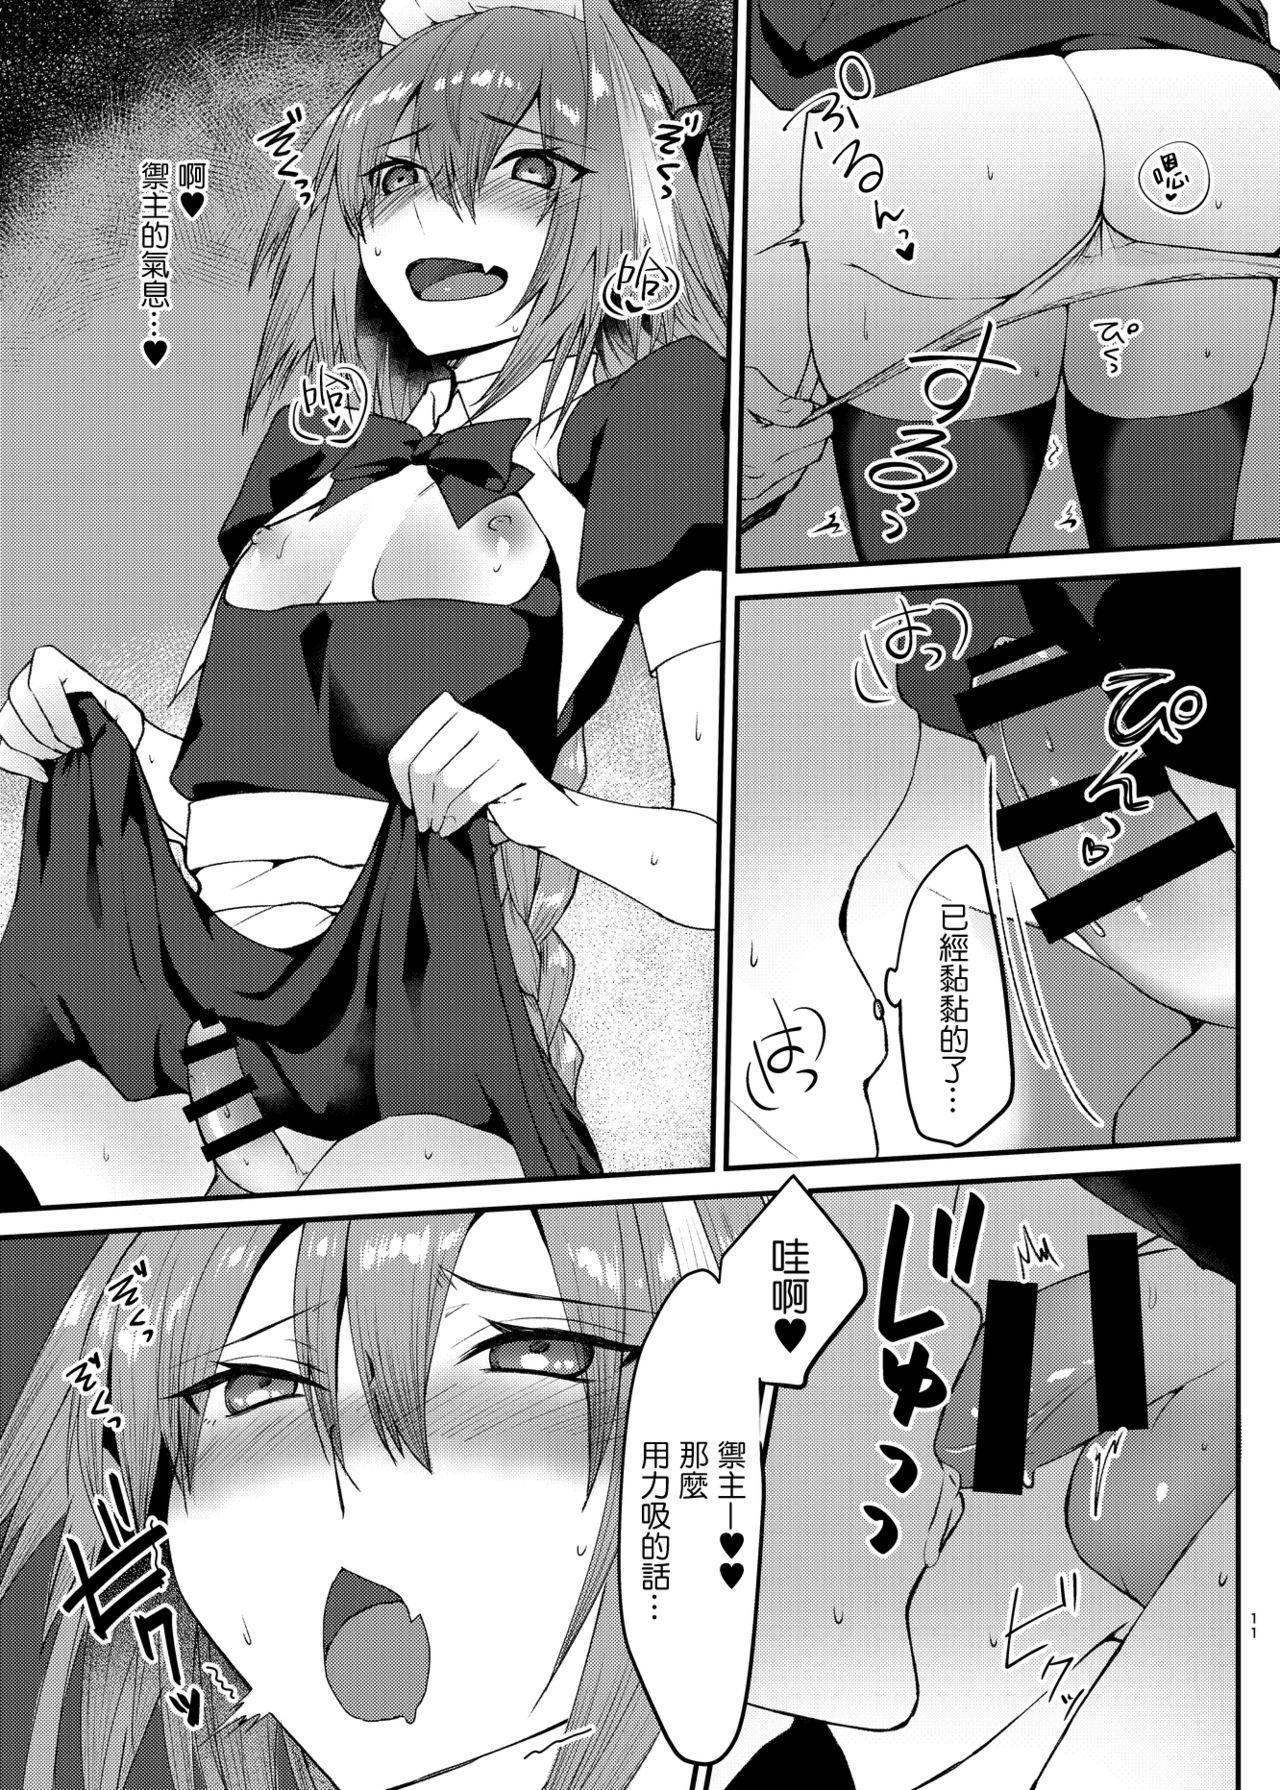 Asians Astolfo-kun to Cosplay H suru Hon - Fate grand order Trimmed - Page 11